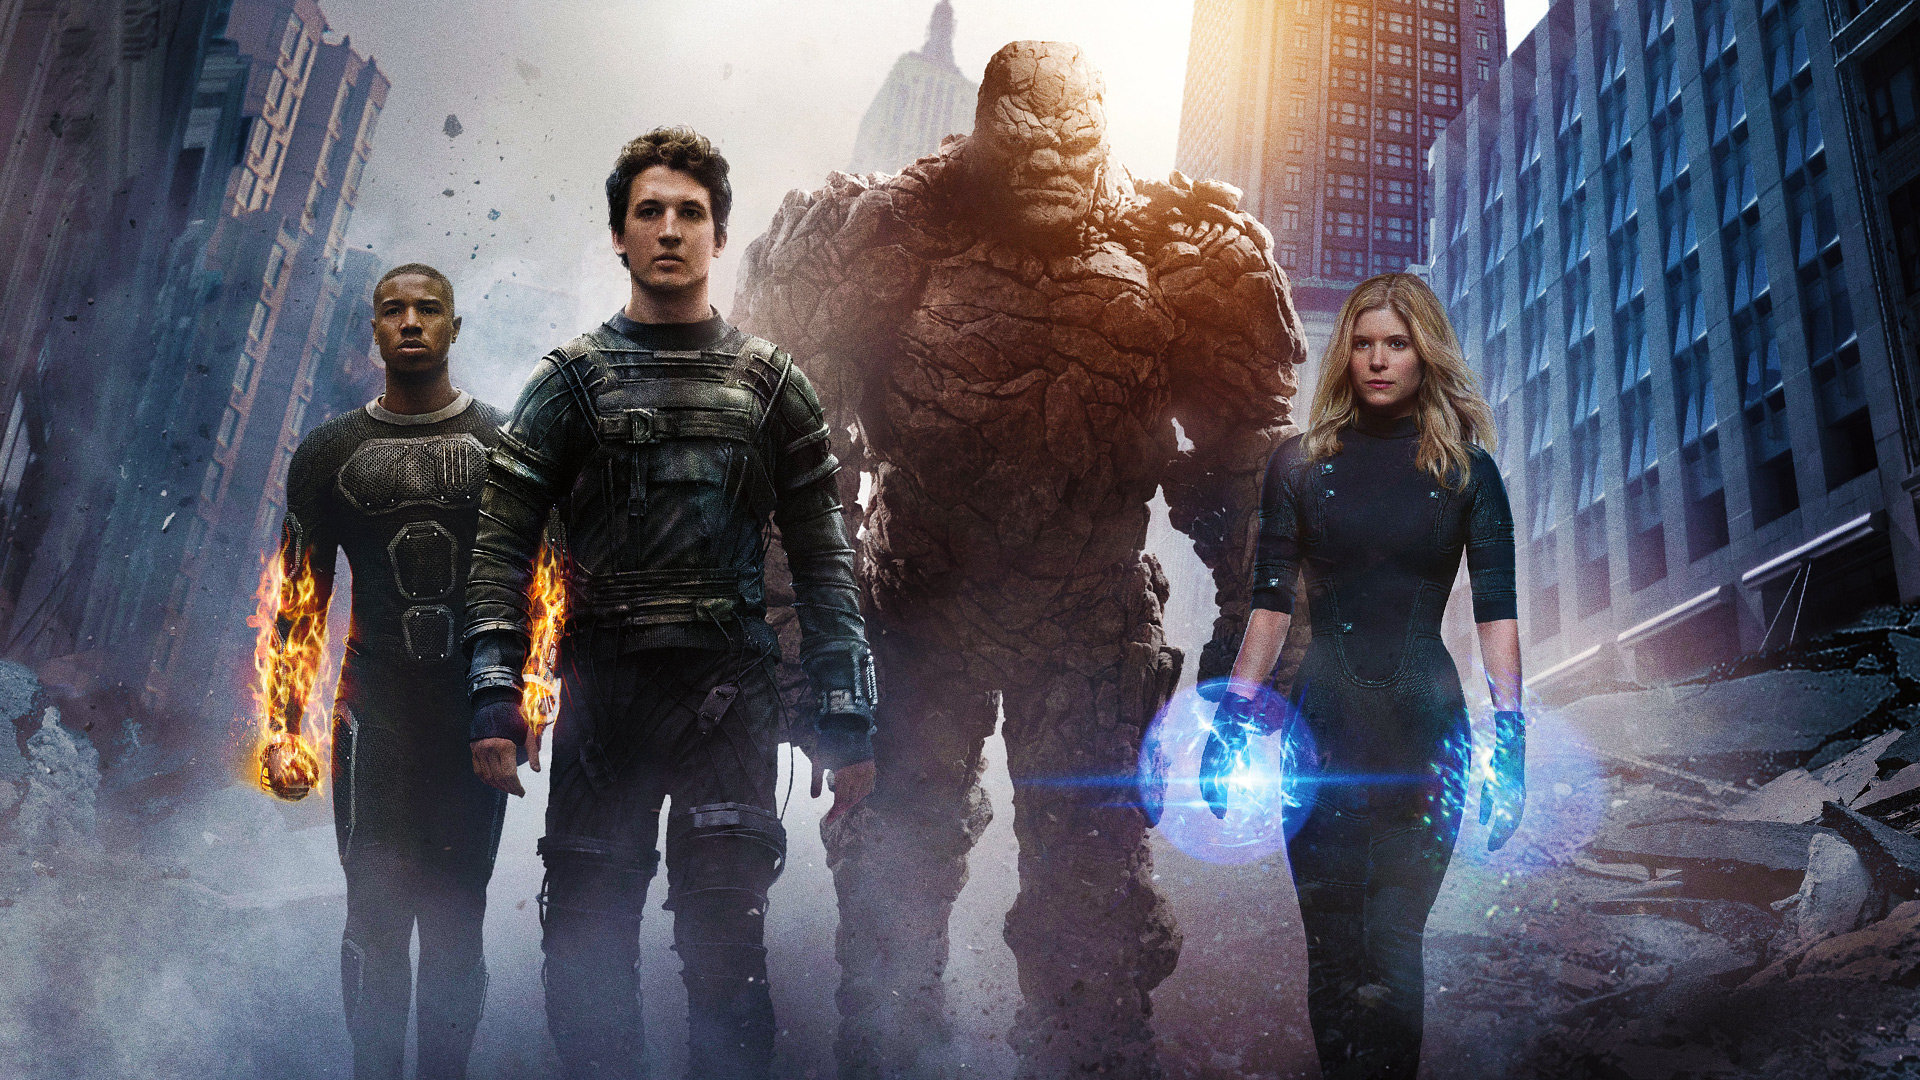 Best Fantastic Four Movie wallpaper ID:70149 for High Resolution full hd 1080p PC